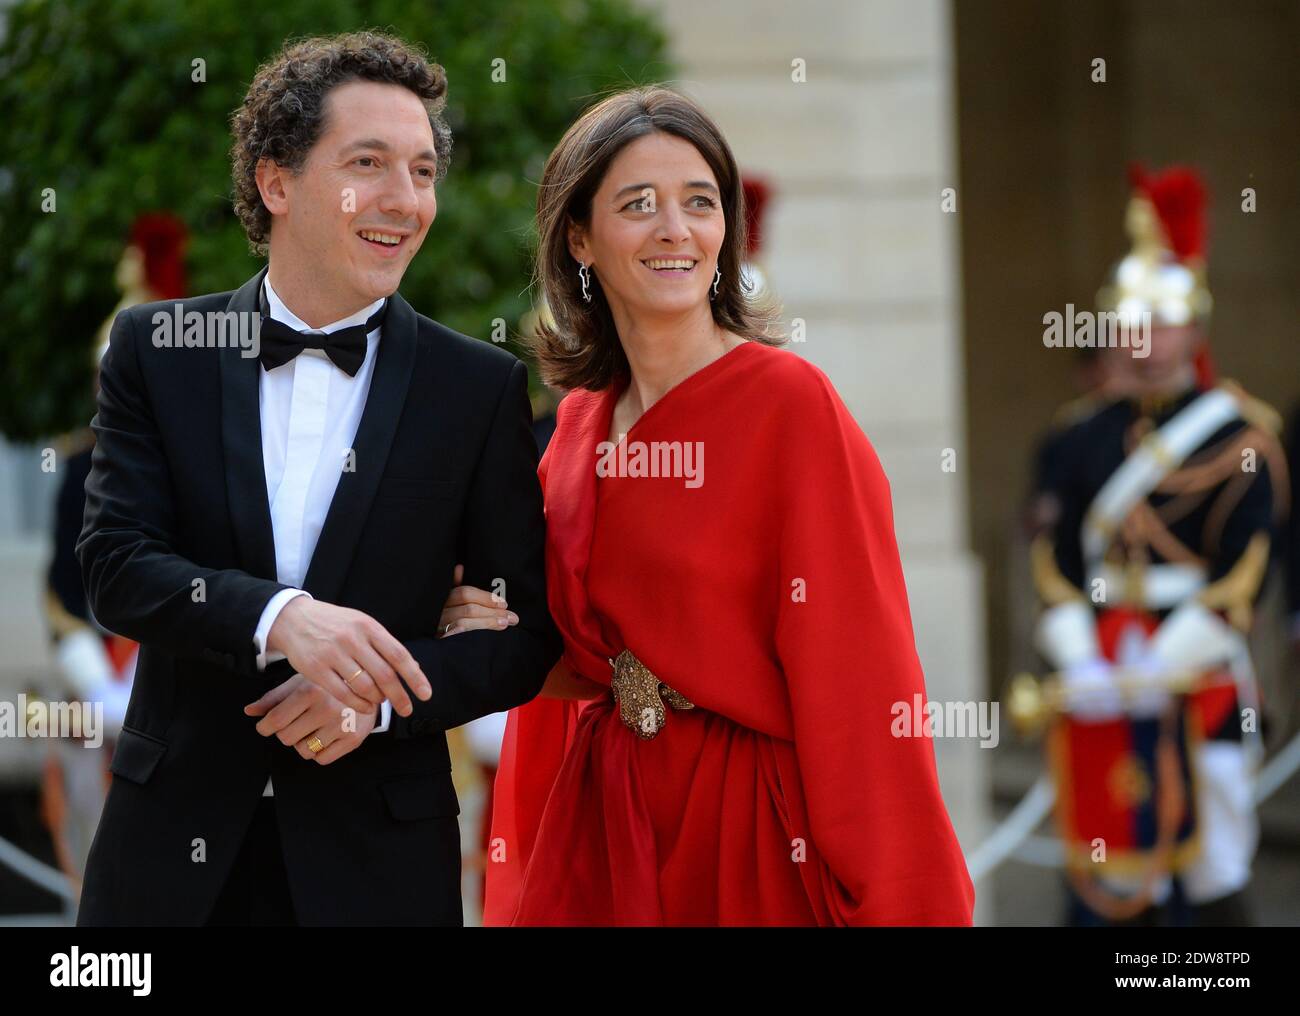 Guillaume Gallienne and Amandine Gallienne attend the State Banquet given in honour of HM The Queen Elizabeth II by French President Francois Hollande at the Elysee Palace, as part of the official ceremonies of the 70th Anniversary of the D Day, on June 6, 2014, in Paris, France. Photo by Christian Liewig/ABACAPRESS.COM Stock Photo